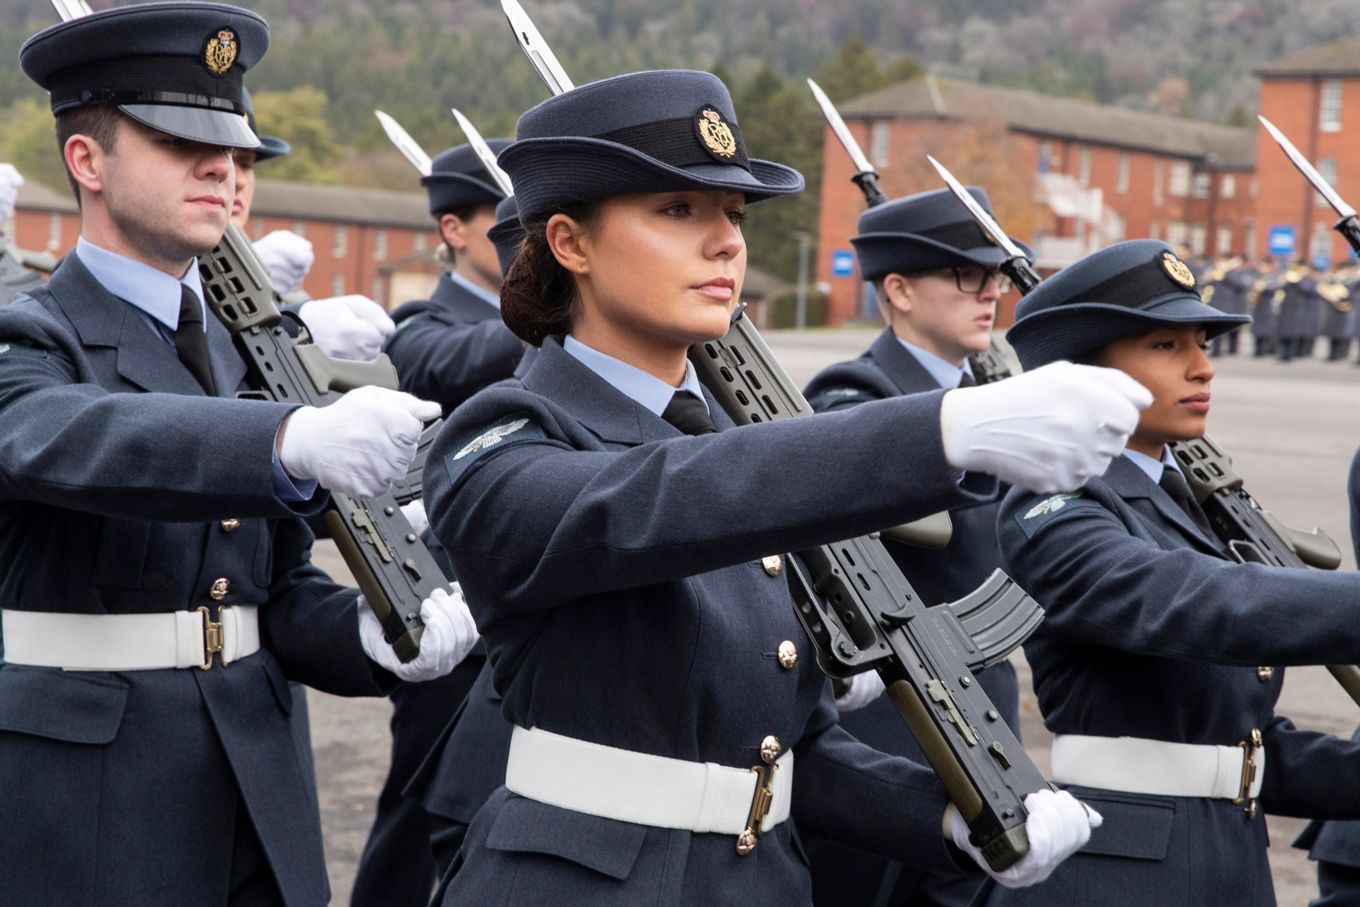 Image shows RAF personnel during a graduation parade.